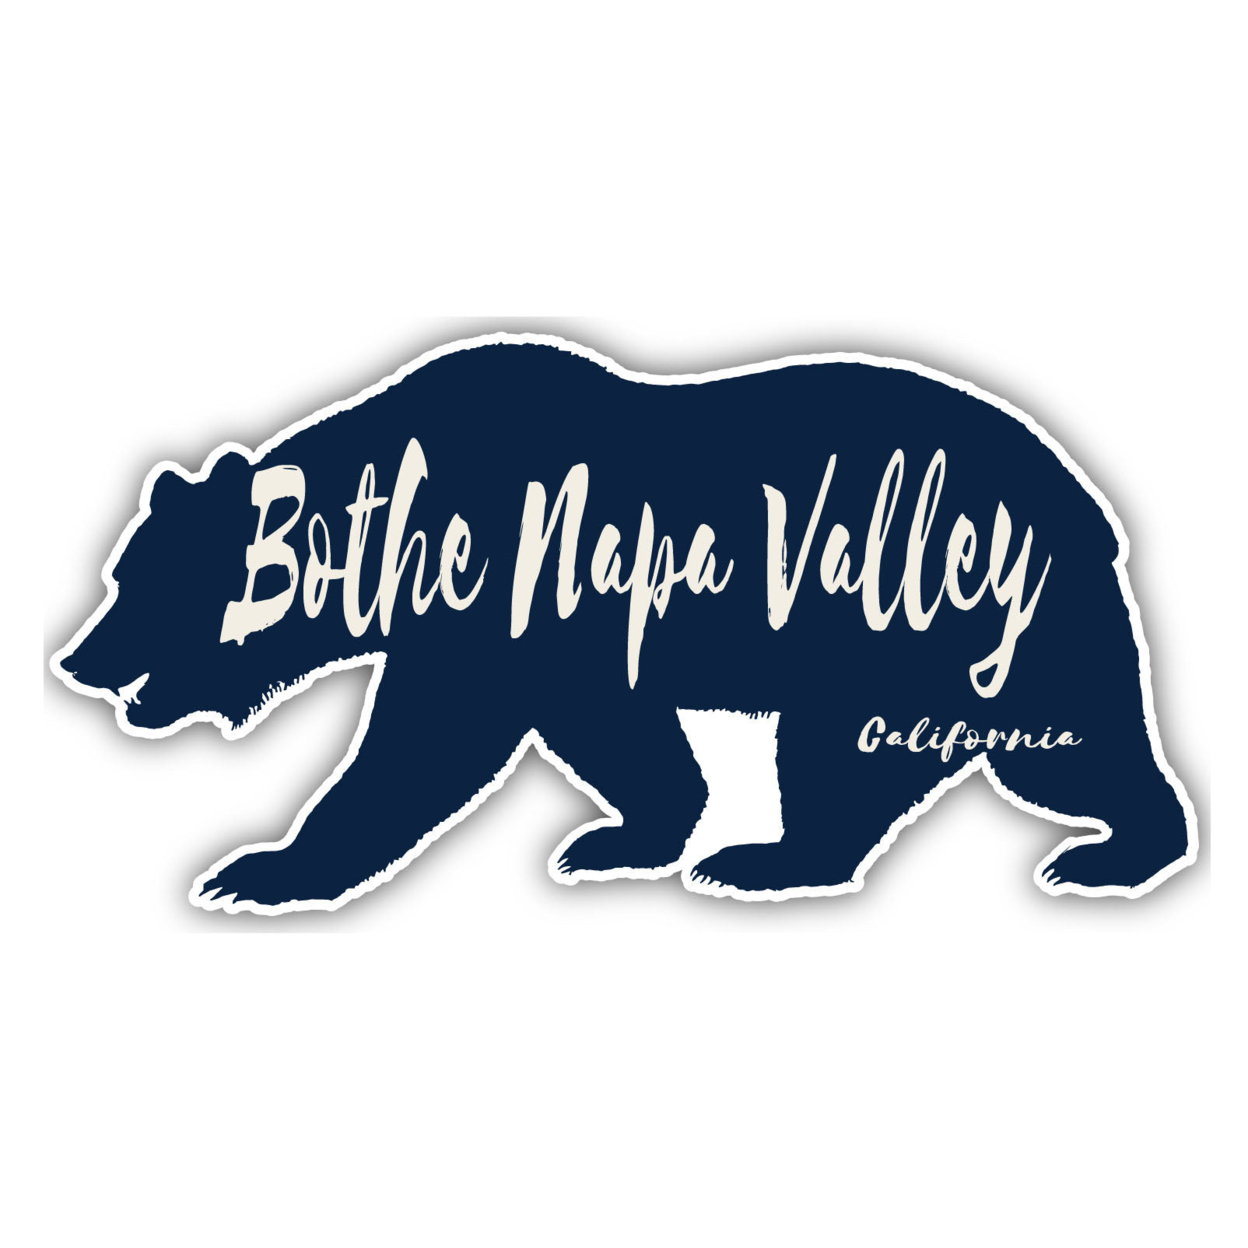 Bothe Napa Valley California Souvenir Decorative Stickers (Choose Theme And Size) - 4-Pack, 4-Inch, Bear